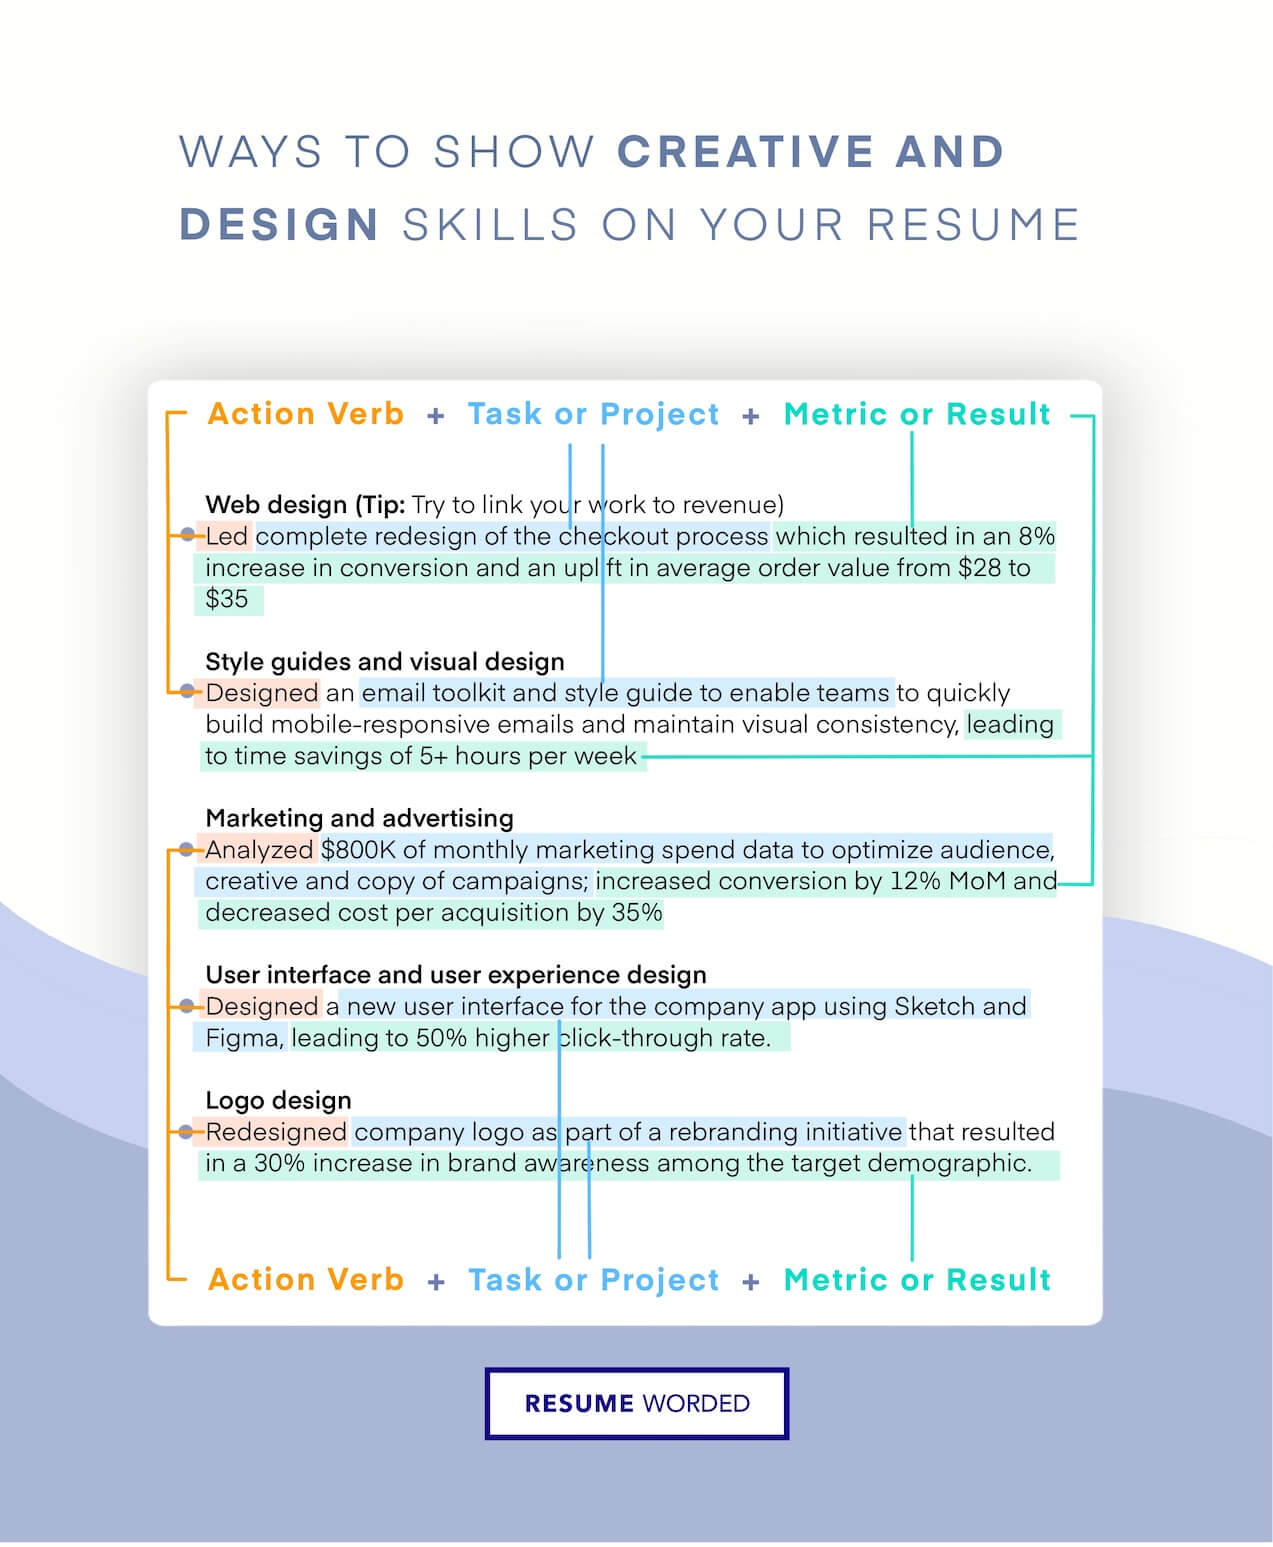 Education is relevant to associate creative directors - Associate Creative Director Resume